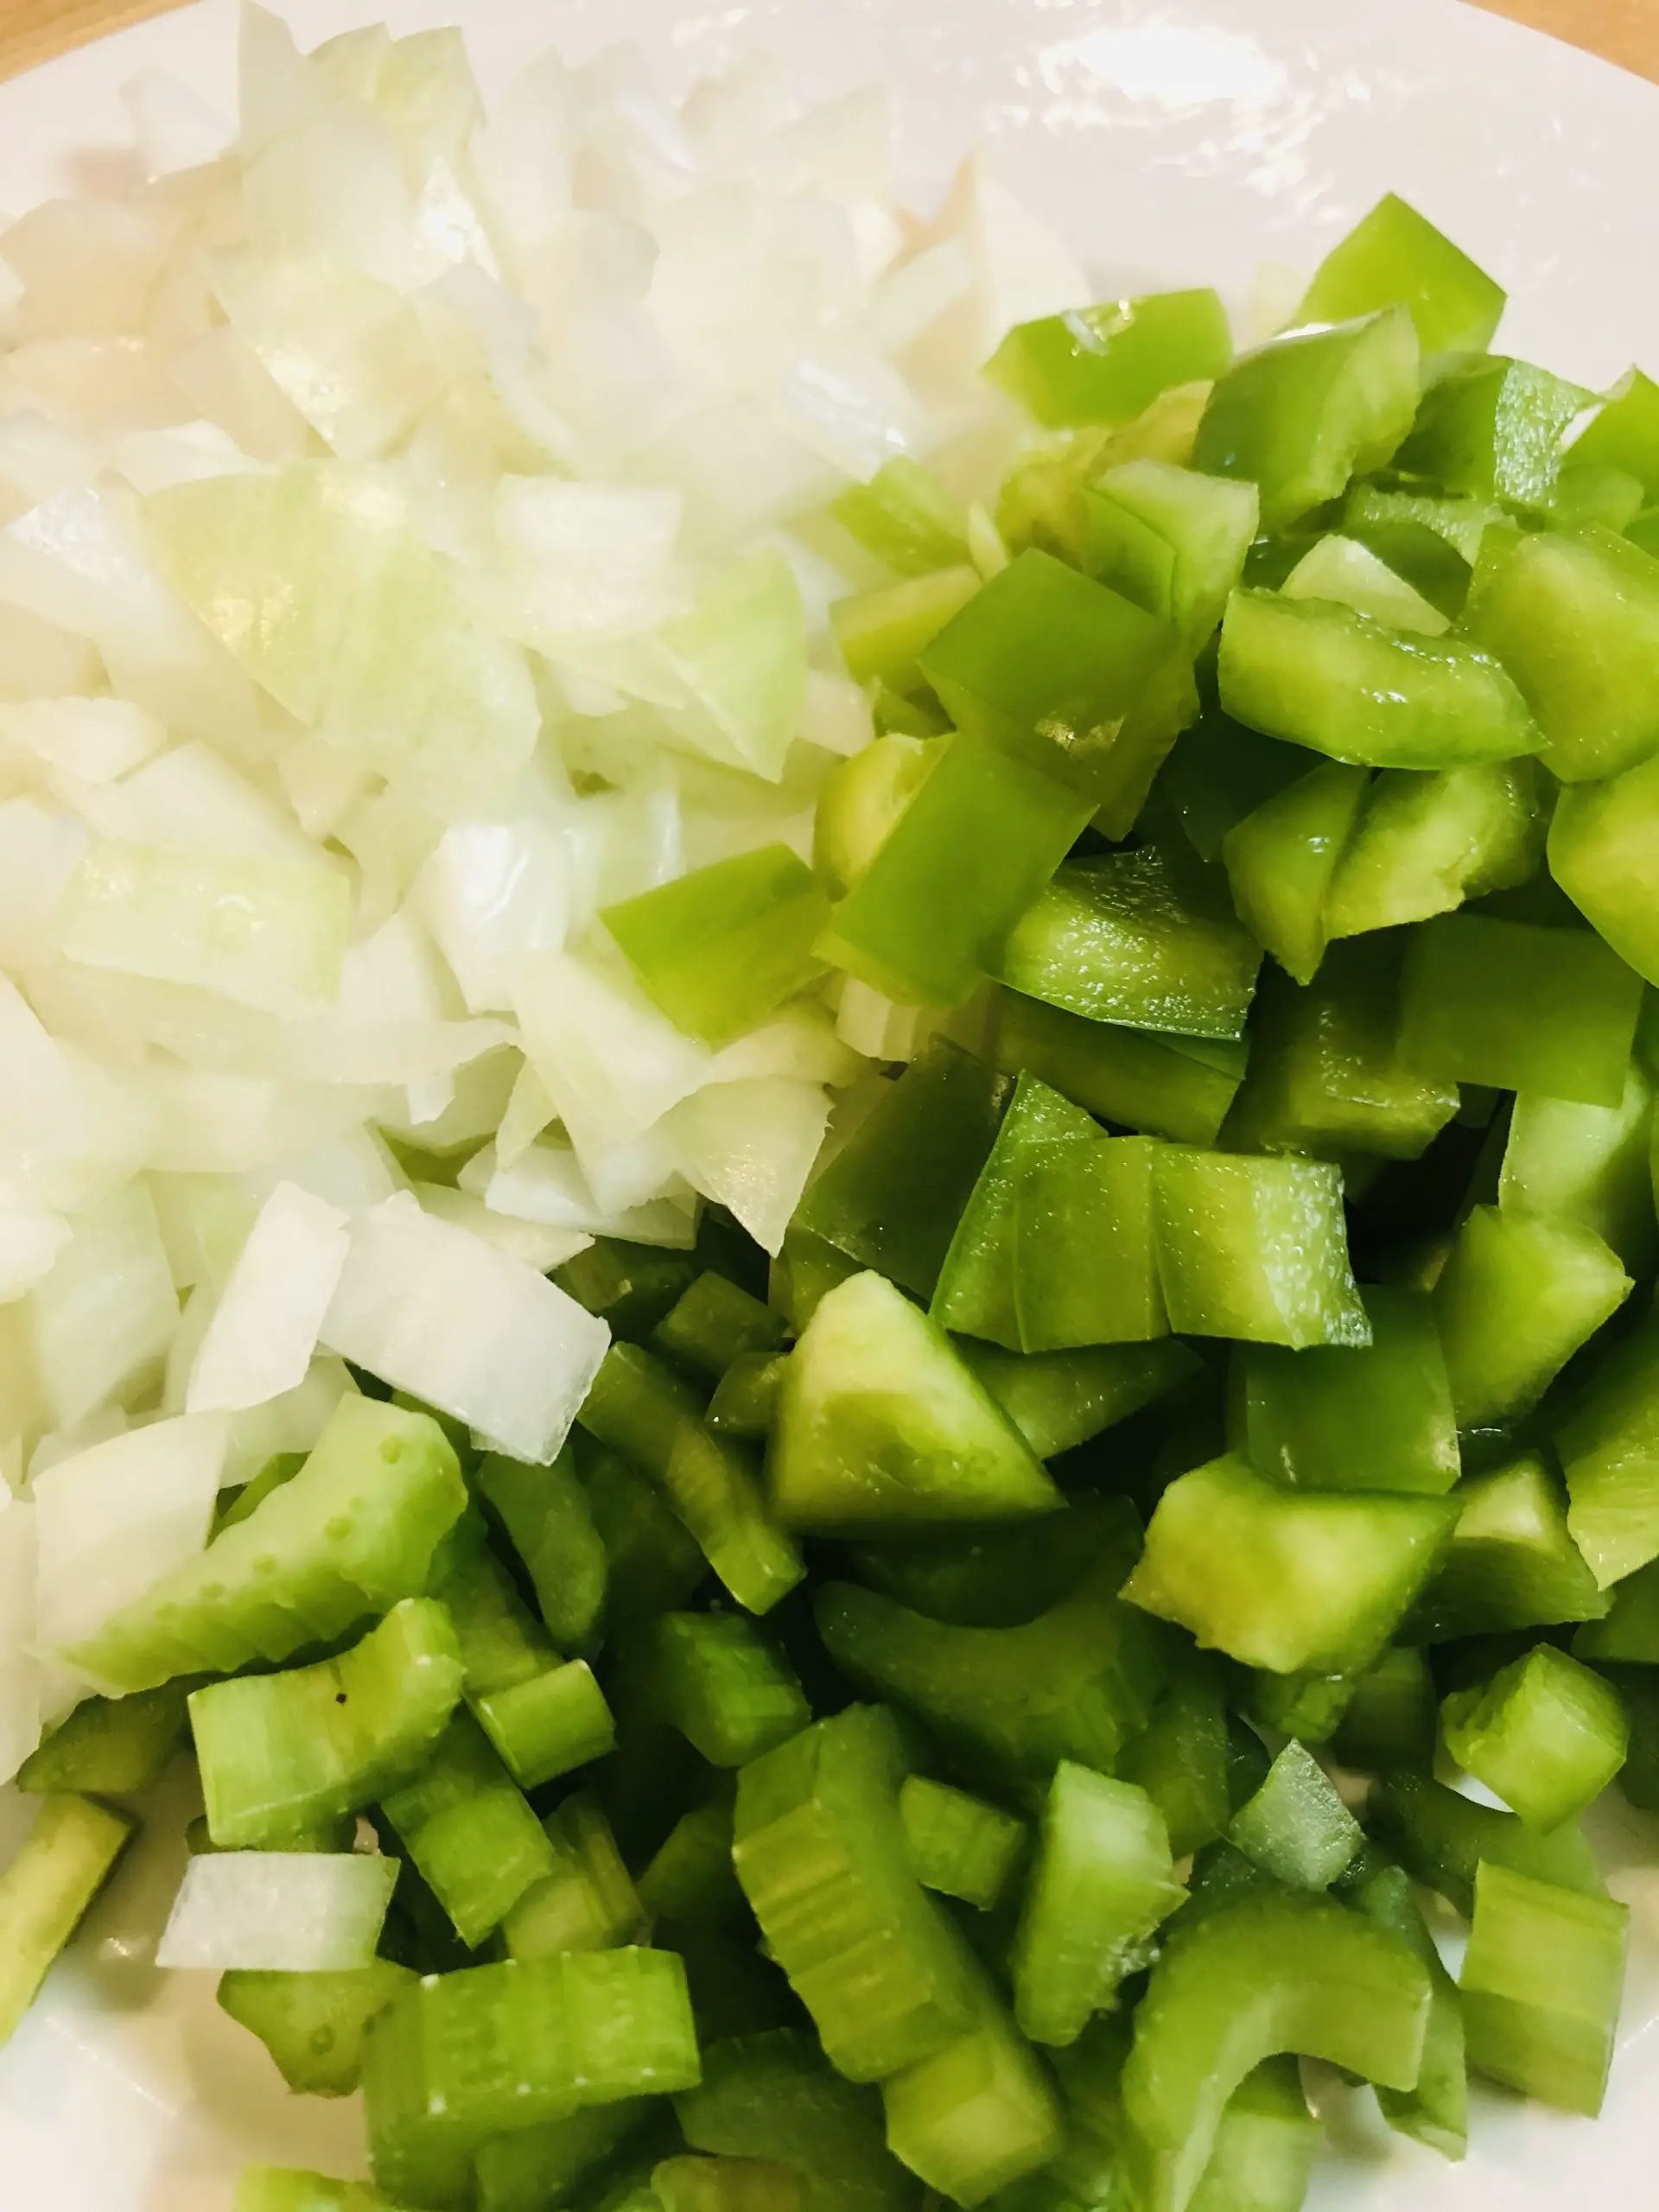 Diced green bell pepper, onion, and celery